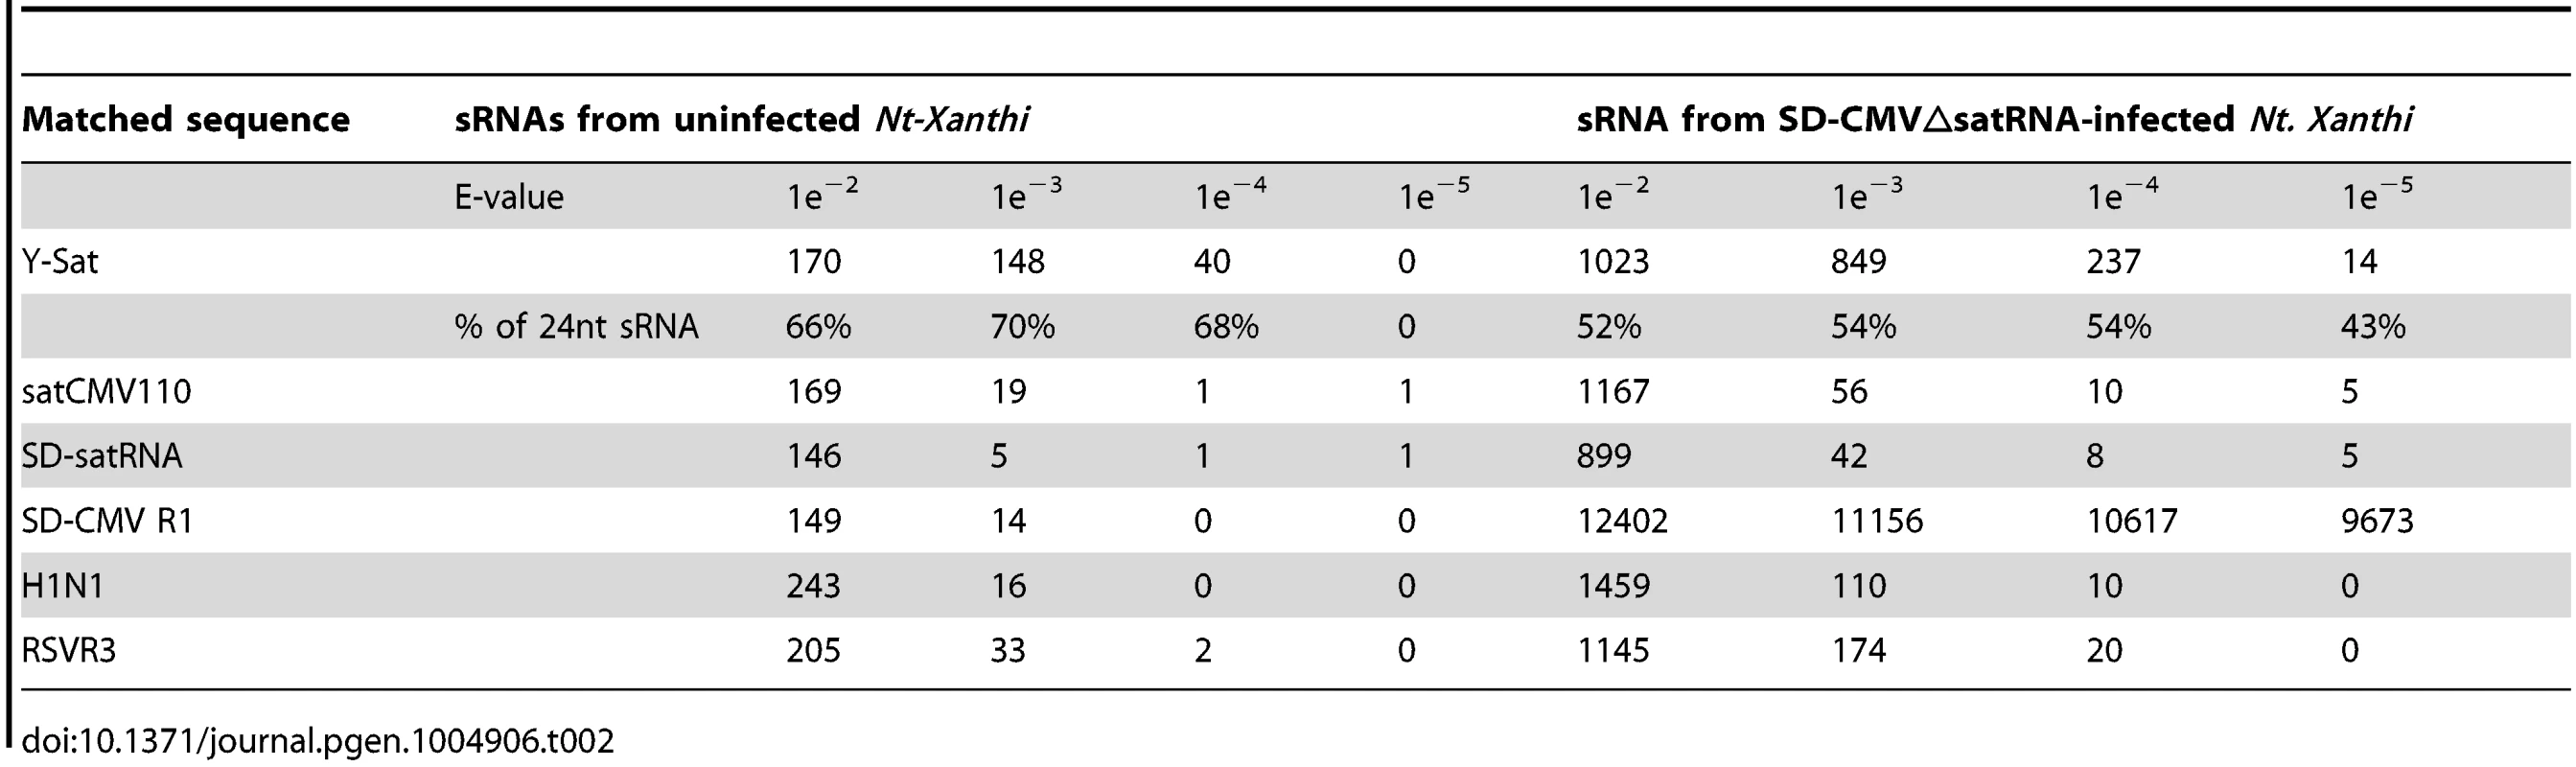 Number of unique sRNA sequence hits to target sequence under different stringency of sequence match (E-value).